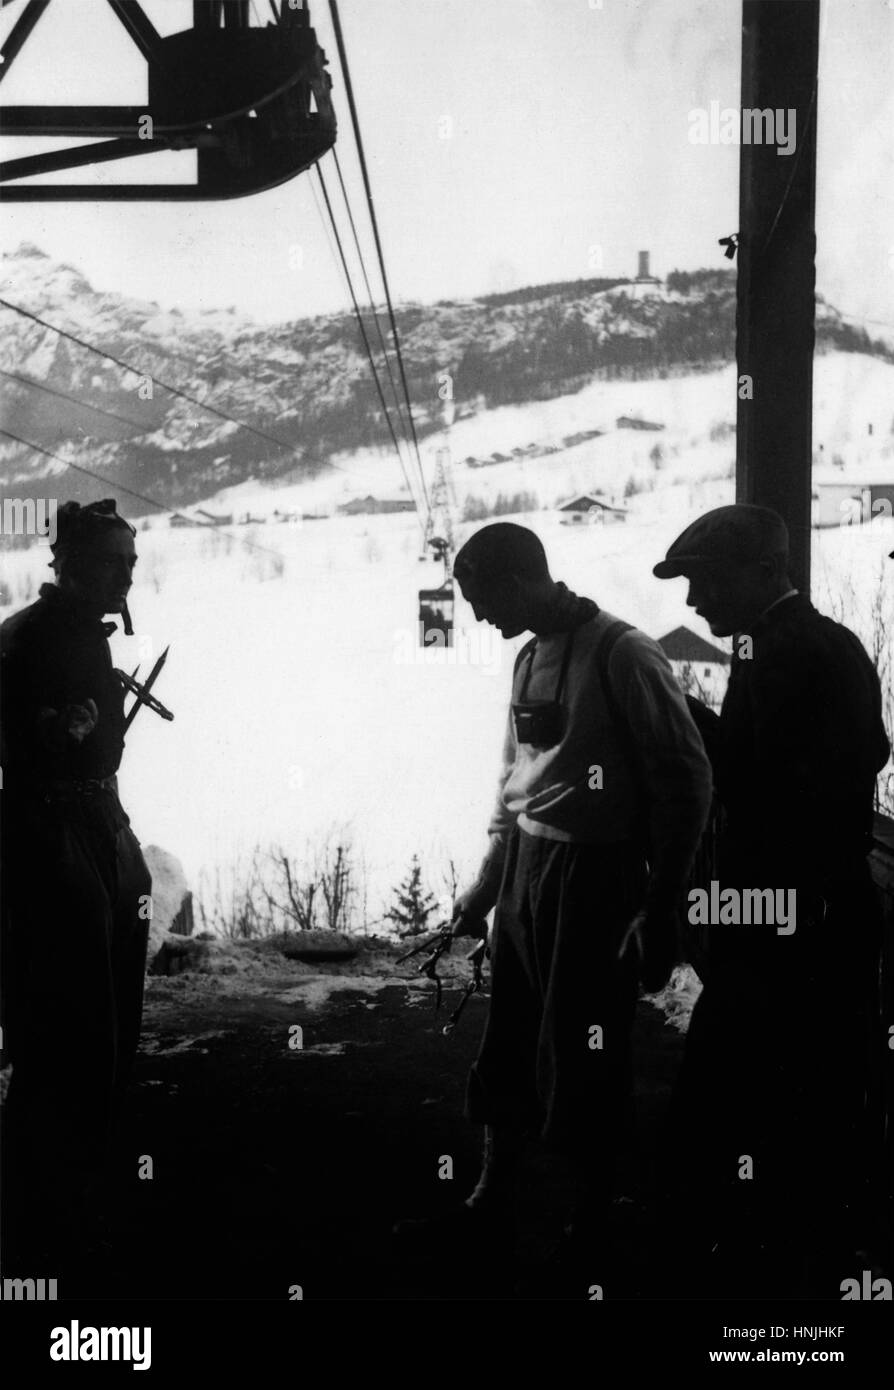 January 1939, Skiers wait for the teleferic in Pocol, Cortina, Italy.   Scan from analog photography, private family collection before WWII. Stock Photo